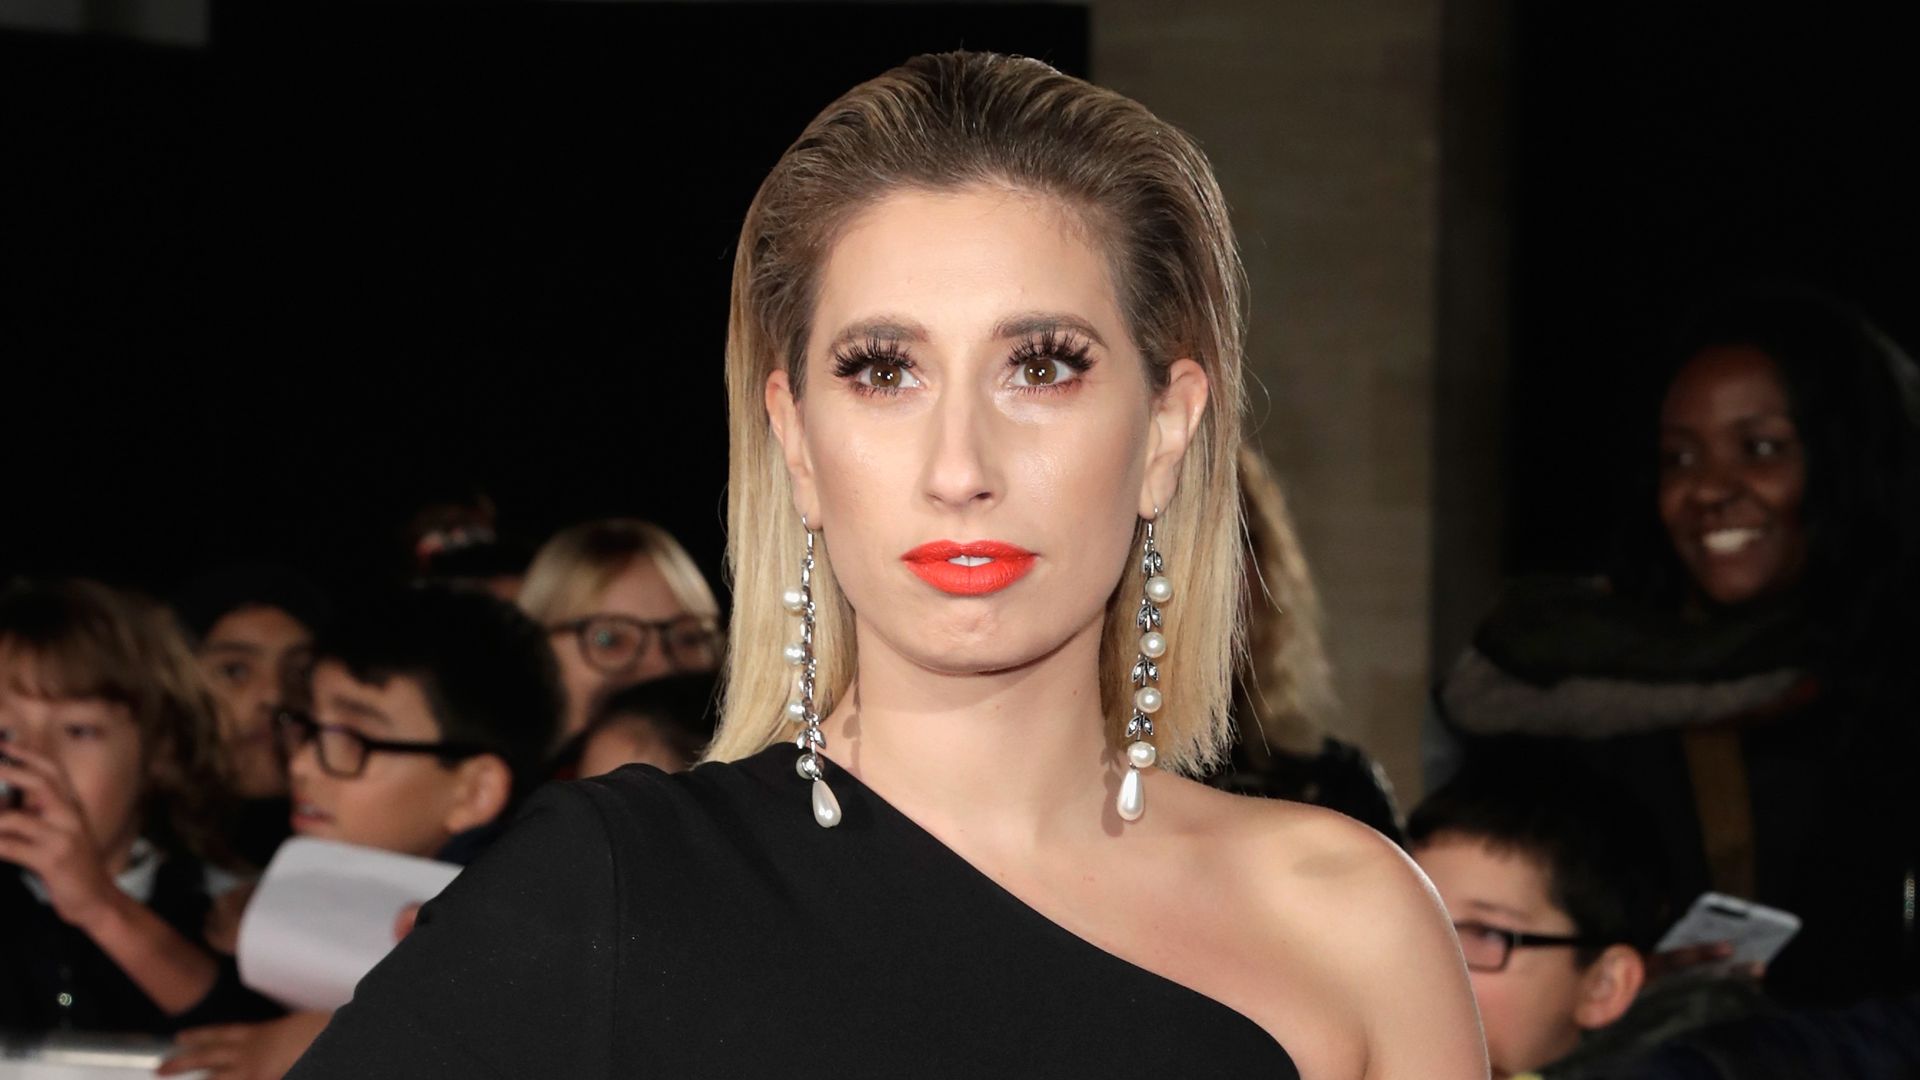 Stacey Solomon in a black dress with one shoulder exposed